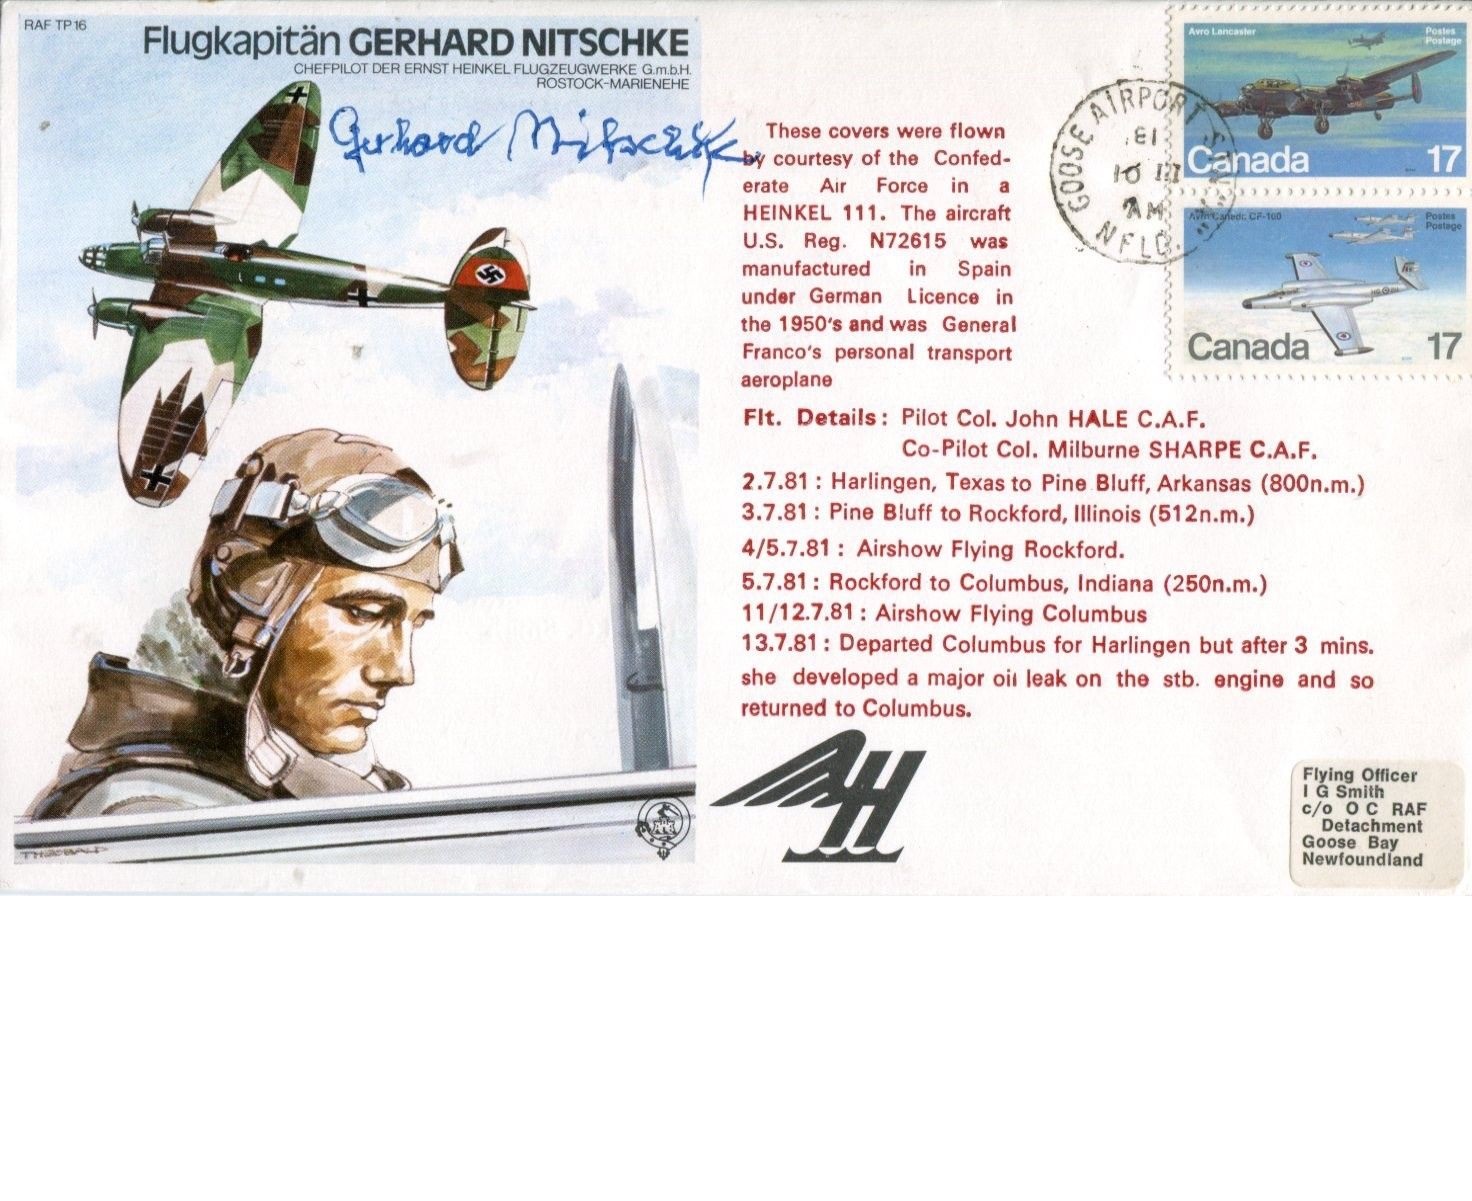 LUFTWAFFE TEST PILOT. Test Pilots series commemorative envelope dedicated to and signed by former